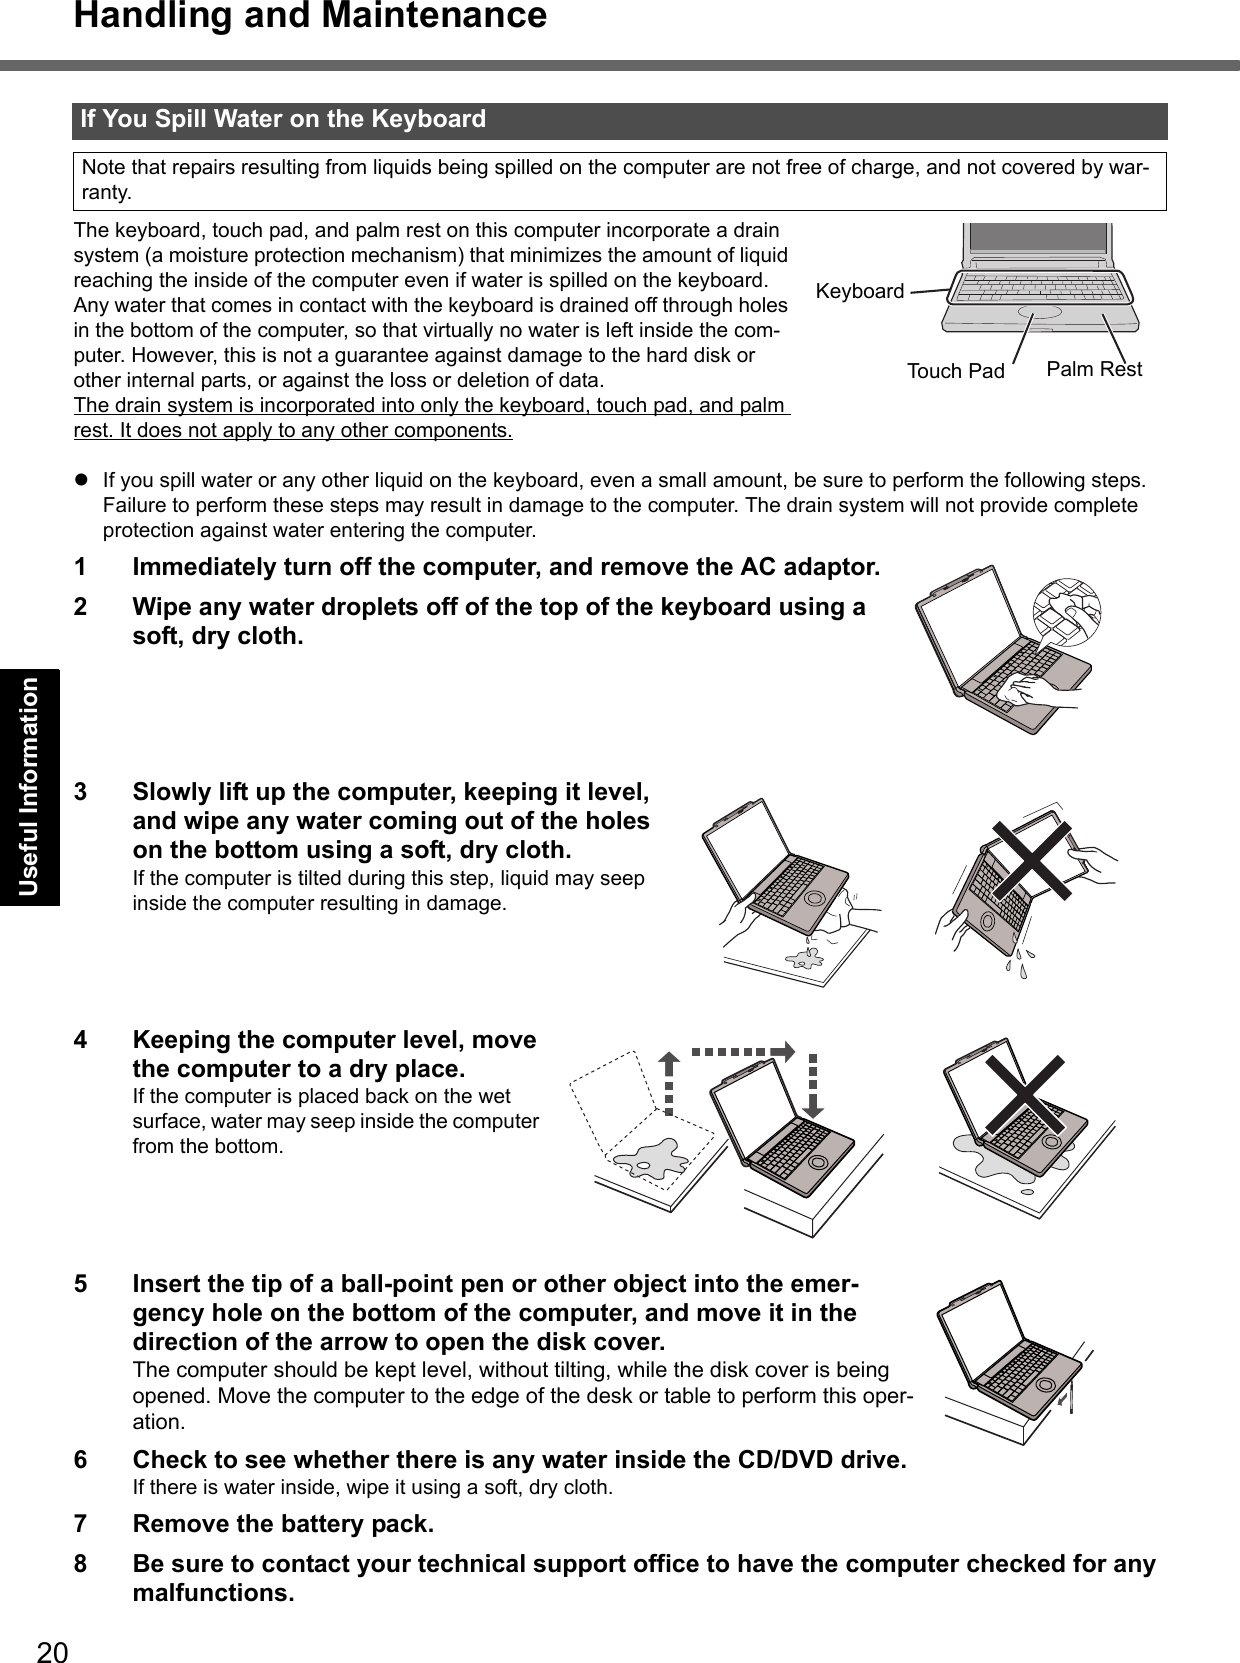 20Getting StartedUseful InformationTroubleshootingAppendixHandling and MaintenanceThe keyboard, touch pad, and palm rest on this computer incorporate a drain system (a moisture protection mechanism) that minimizes the amount of liquid reaching the inside of the computer even if water is spilled on the keyboard.Any water that comes in contact with the keyboard is drained off through holes in the bottom of the computer, so that virtually no water is left inside the com-puter. However, this is not a guarantee against damage to the hard disk or other internal parts, or against the loss or deletion of data.The drain system is incorporated into only the keyboard, touch pad, and palm rest. It does not apply to any other components.zIf you spill water or any other liquid on the keyboard, even a small amount, be sure to perform the following steps. Failure to perform these steps may result in damage to the computer. The drain system will not provide complete protection against water entering the computer.1 Immediately turn off the computer, and remove the AC adaptor. 2 Wipe any water droplets off of the top of the keyboard using a soft, dry cloth. 3 Slowly lift up the computer, keeping it level, and wipe any water coming out of the holes on the bottom using a soft, dry cloth.If the computer is tilted during this step, liquid may seep inside the computer resulting in damage.4 Keeping the computer level, move the computer to a dry place. If the computer is placed back on the wet surface, water may seep inside the computer from the bottom.5 Insert the tip of a ball-point pen or other object into the emer-gency hole on the bottom of the computer, and move it in the direction of the arrow to open the disk cover. The computer should be kept level, without tilting, while the disk cover is being opened. Move the computer to the edge of the desk or table to perform this oper-ation. 6 Check to see whether there is any water inside the CD/DVD drive. If there is water inside, wipe it using a soft, dry cloth.7 Remove the battery pack.8 Be sure to contact your technical support office to have the computer checked for any malfunctions.If You Spill Water on the KeyboardNote that repairs resulting from liquids being spilled on the computer are not free of charge, and not covered by war-ranty.Touch Pad Palm RestKeyboard